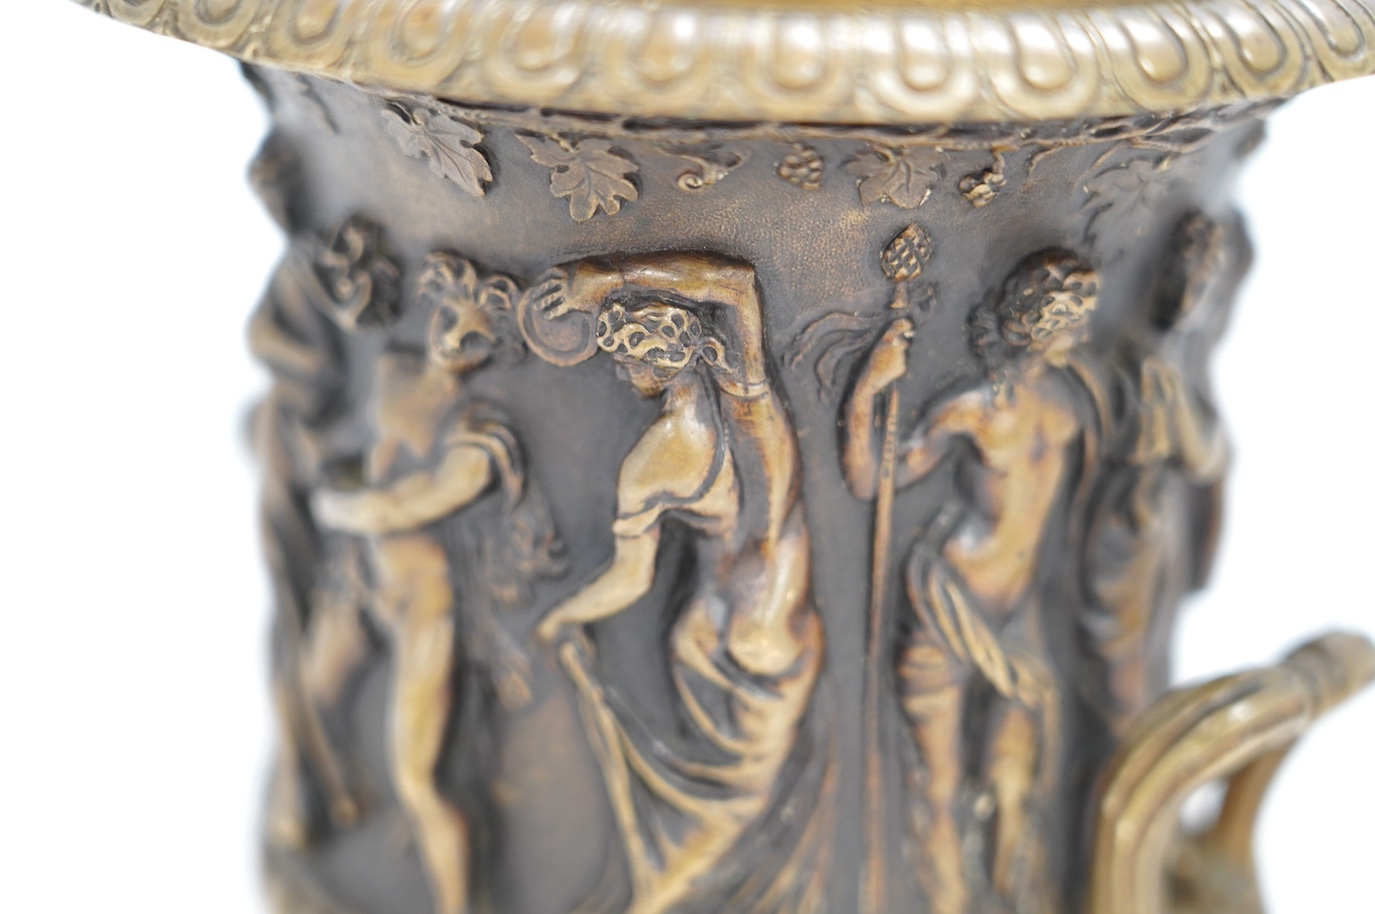 A mid 19th century bronze campana urn with classical figures, 22cm high. Condition - good